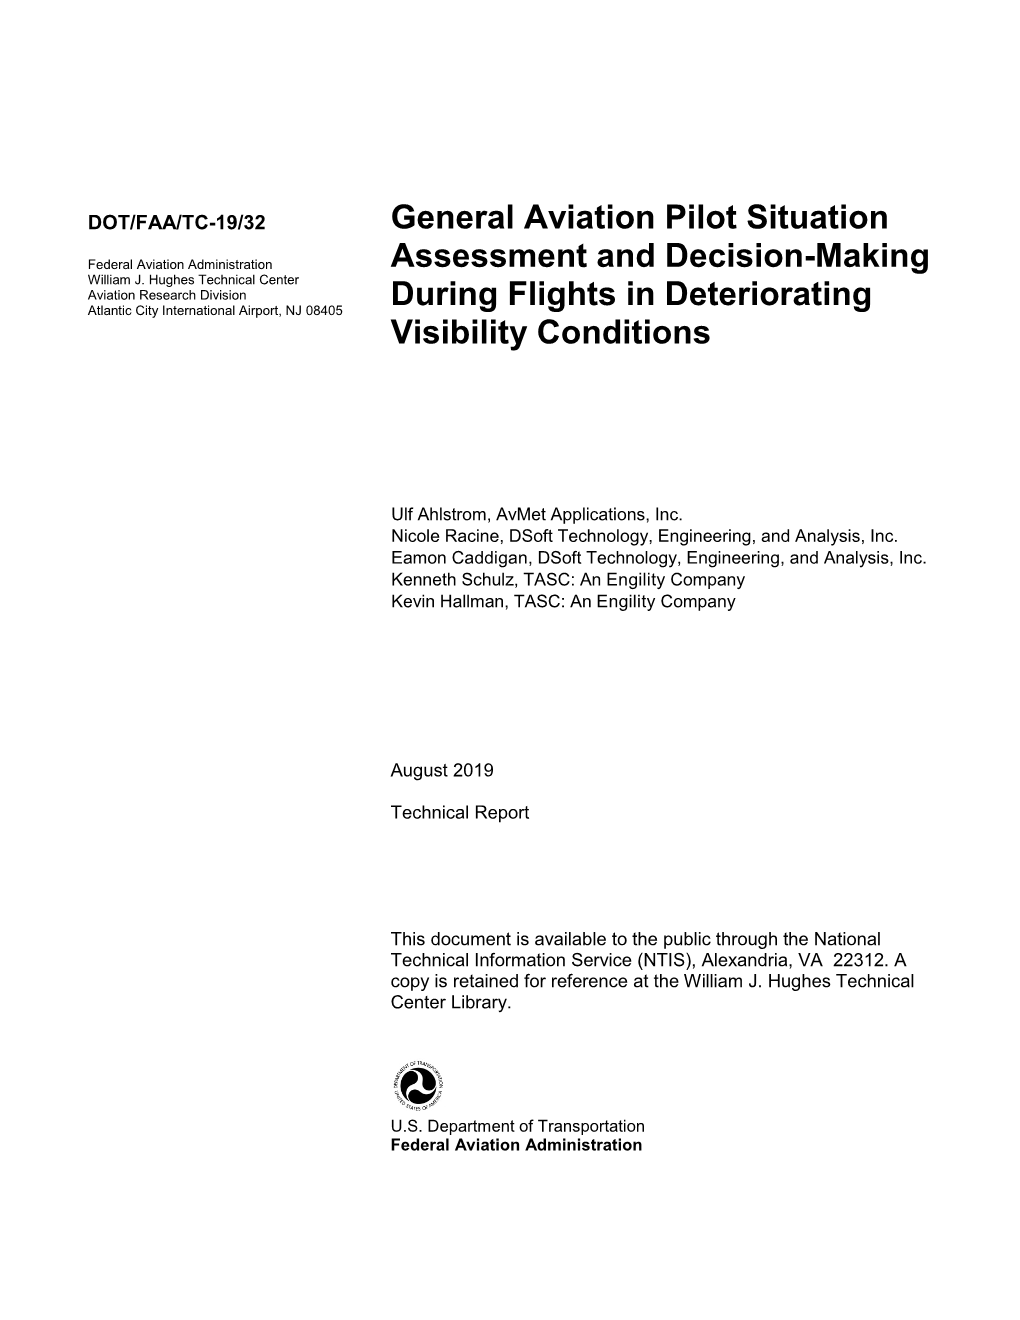 General Aviation Pilot Situation Assessment and Decision-Making During Flights in August 2019 Deteriorating Visibility Conditions 6